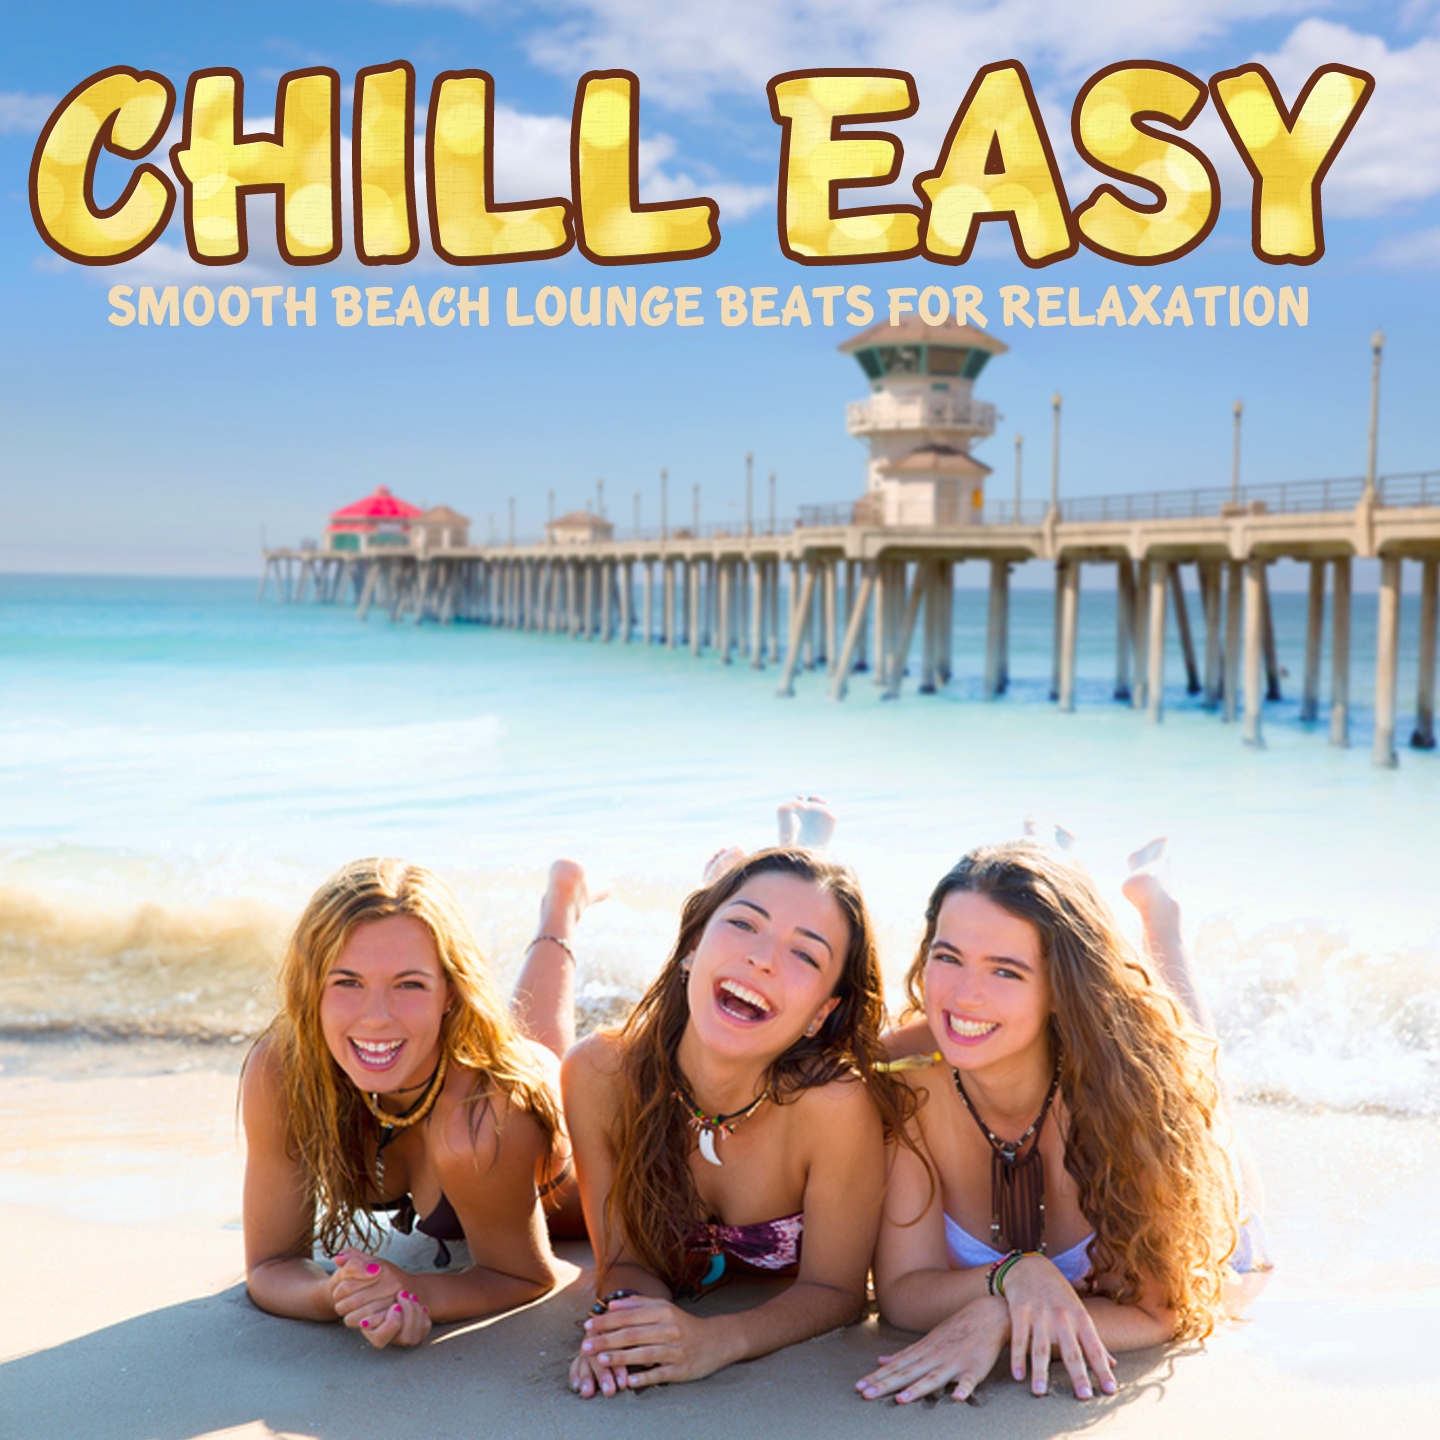 Chill Easy (Smooth Beach Lounge Beats for Relaxation)